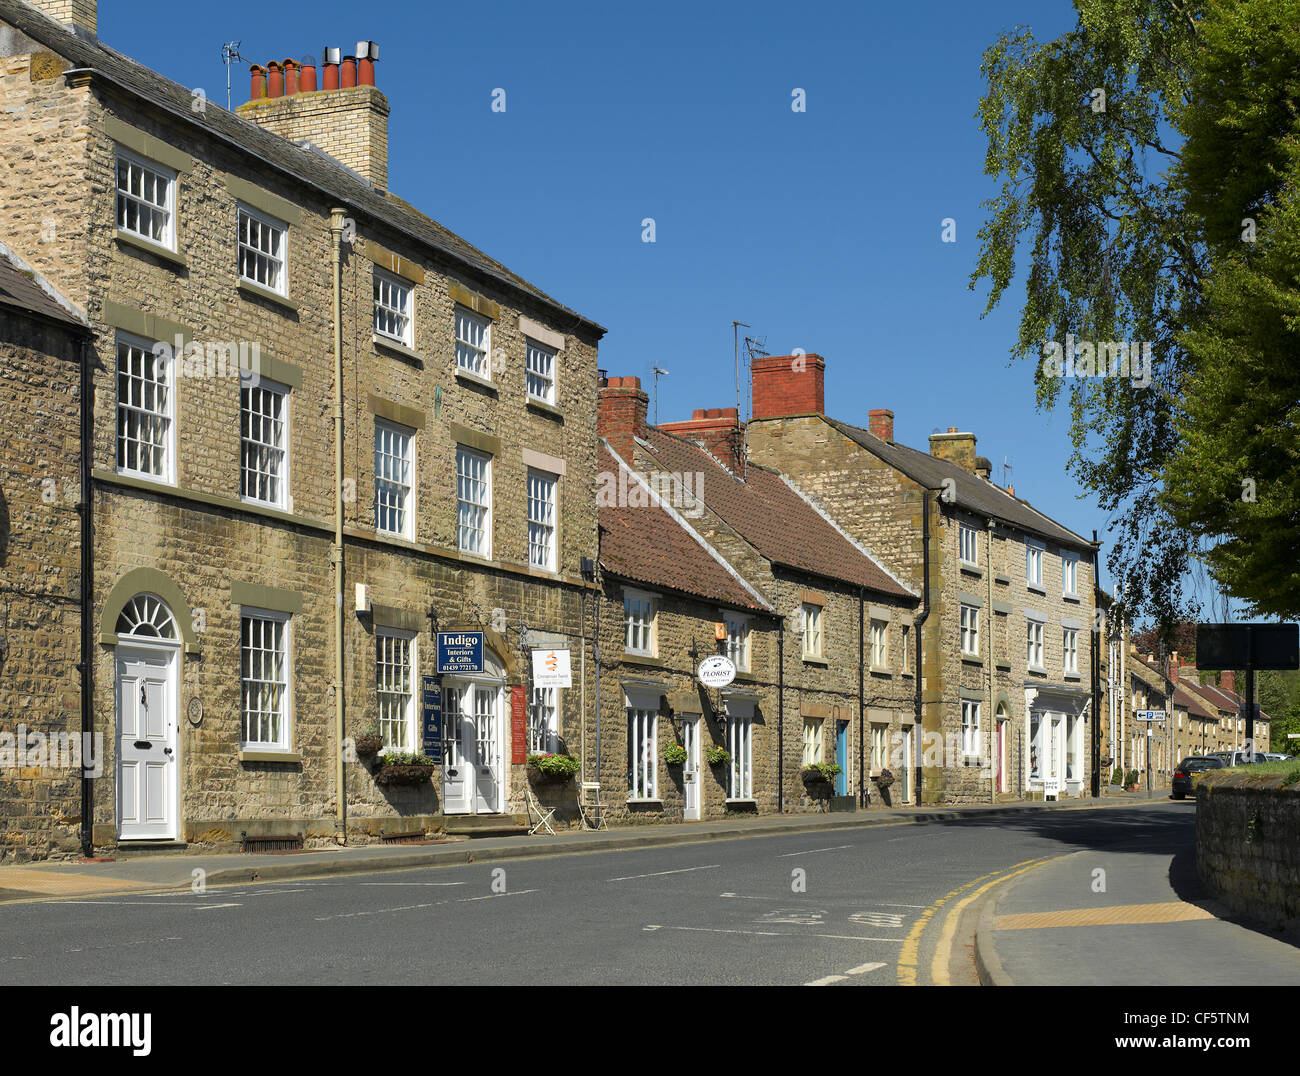 High Street in Helmsley, a historic market town in Ryedale. Stock Photo